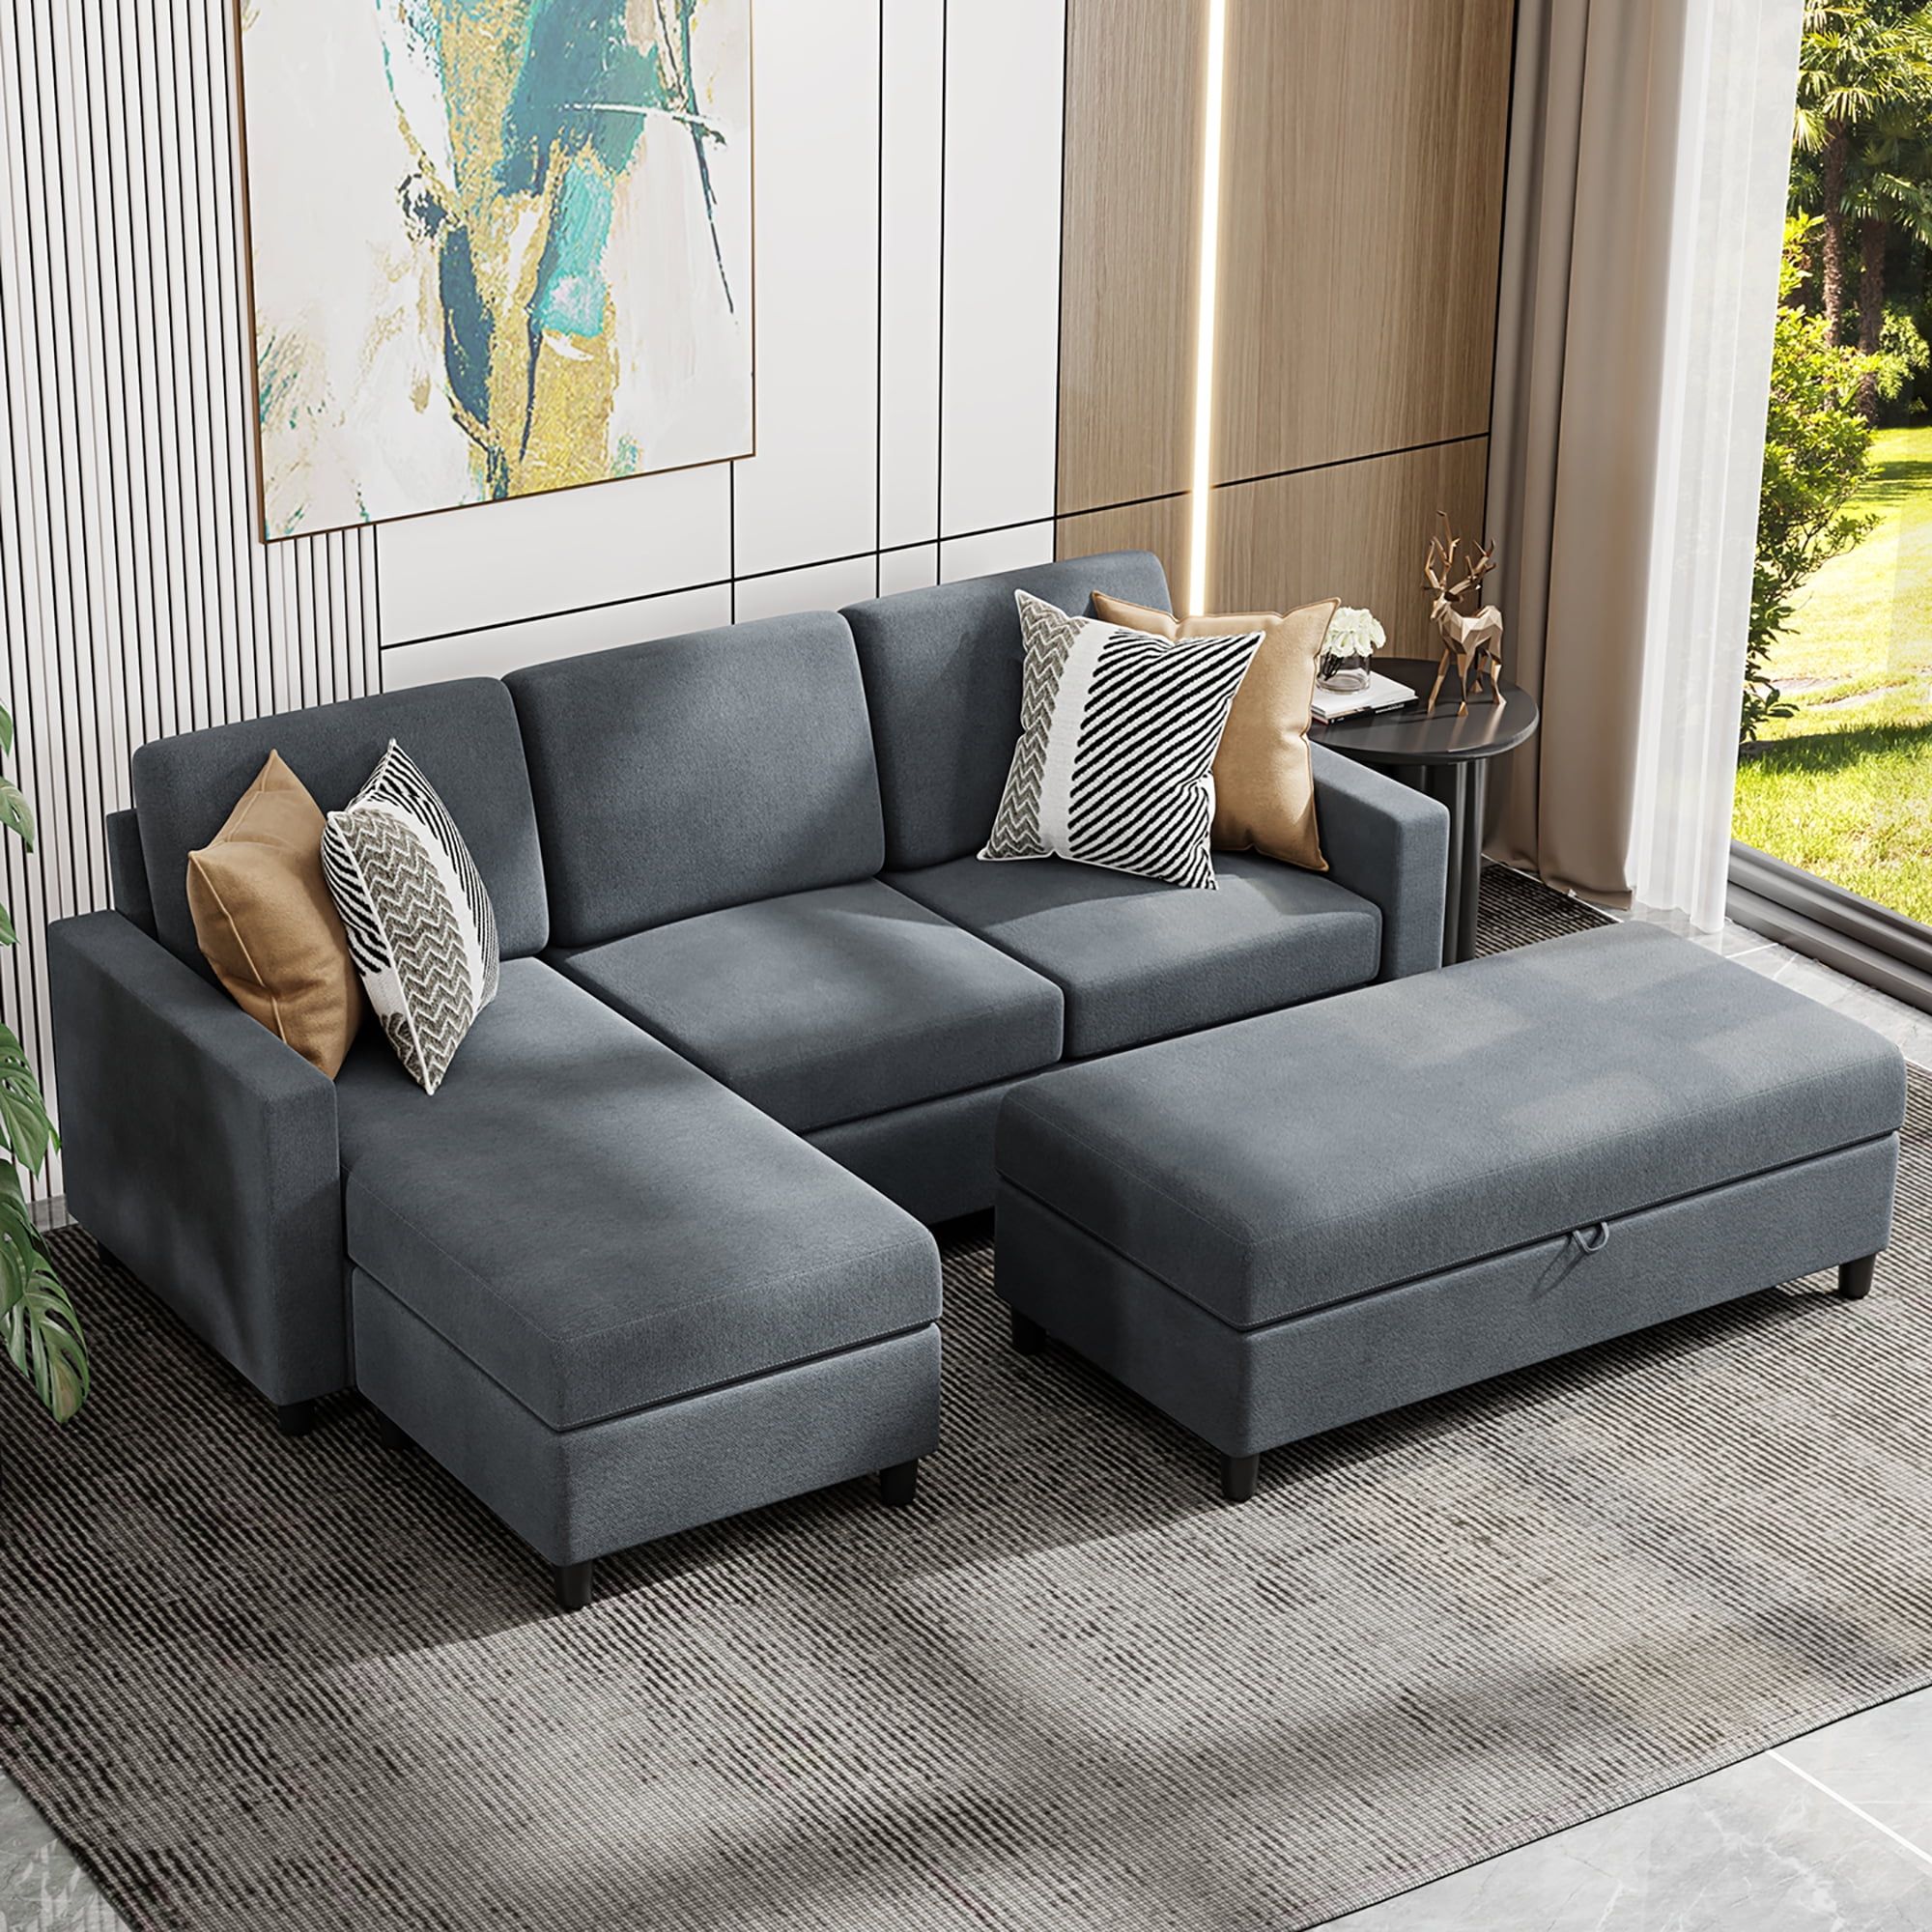 Convertible Sectional Sofa Couch With Storage Ottoman, L Shaped Wide  Reversible Chaise With Linen Fabric(charcoal Grey) – Walmart For Sofas With Ottomans (View 6 of 15)